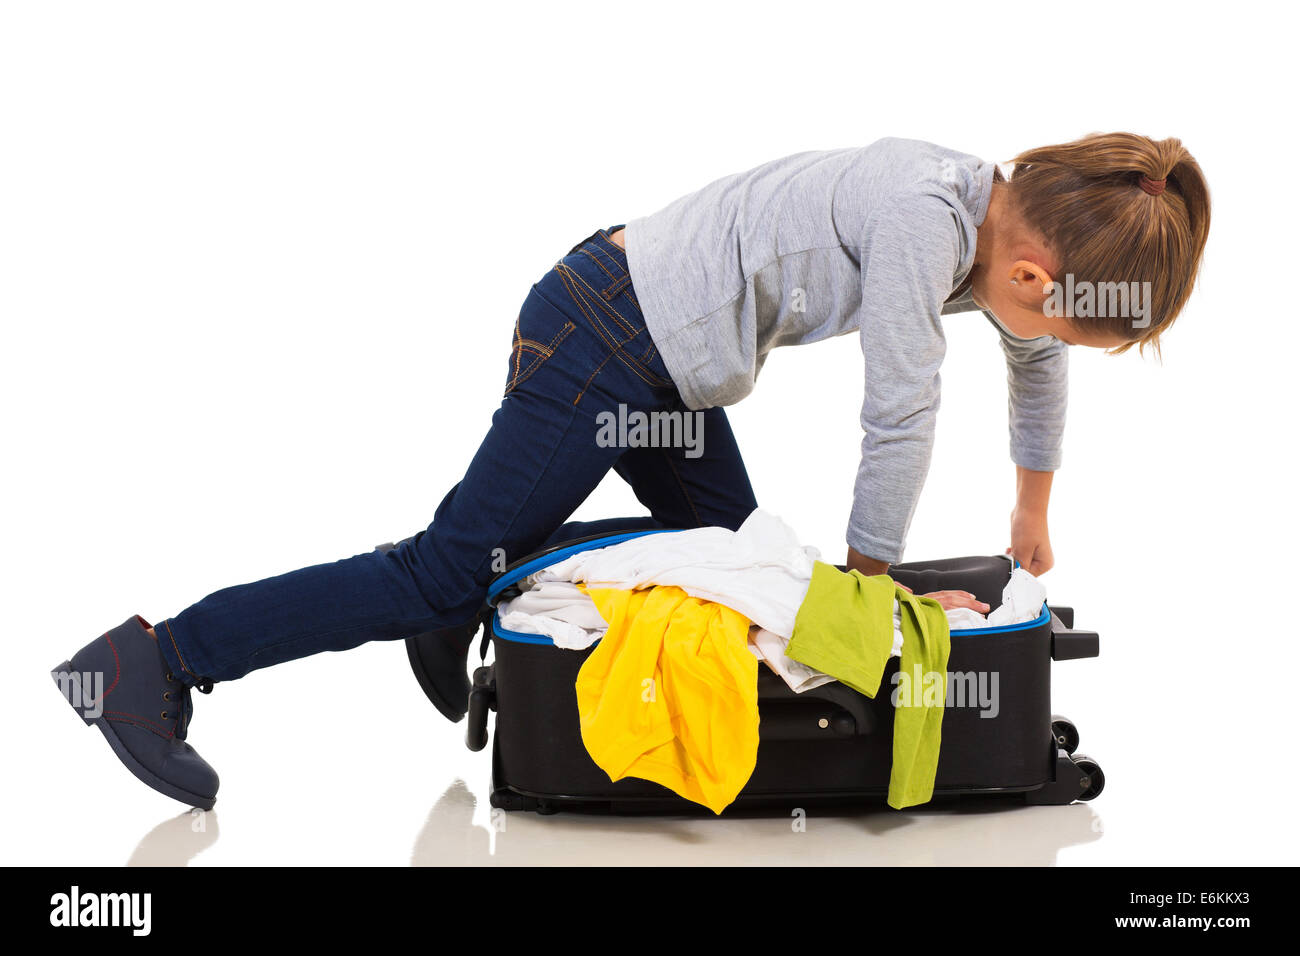 young girl kneeing on suitcase trying to zip it up Stock Photo